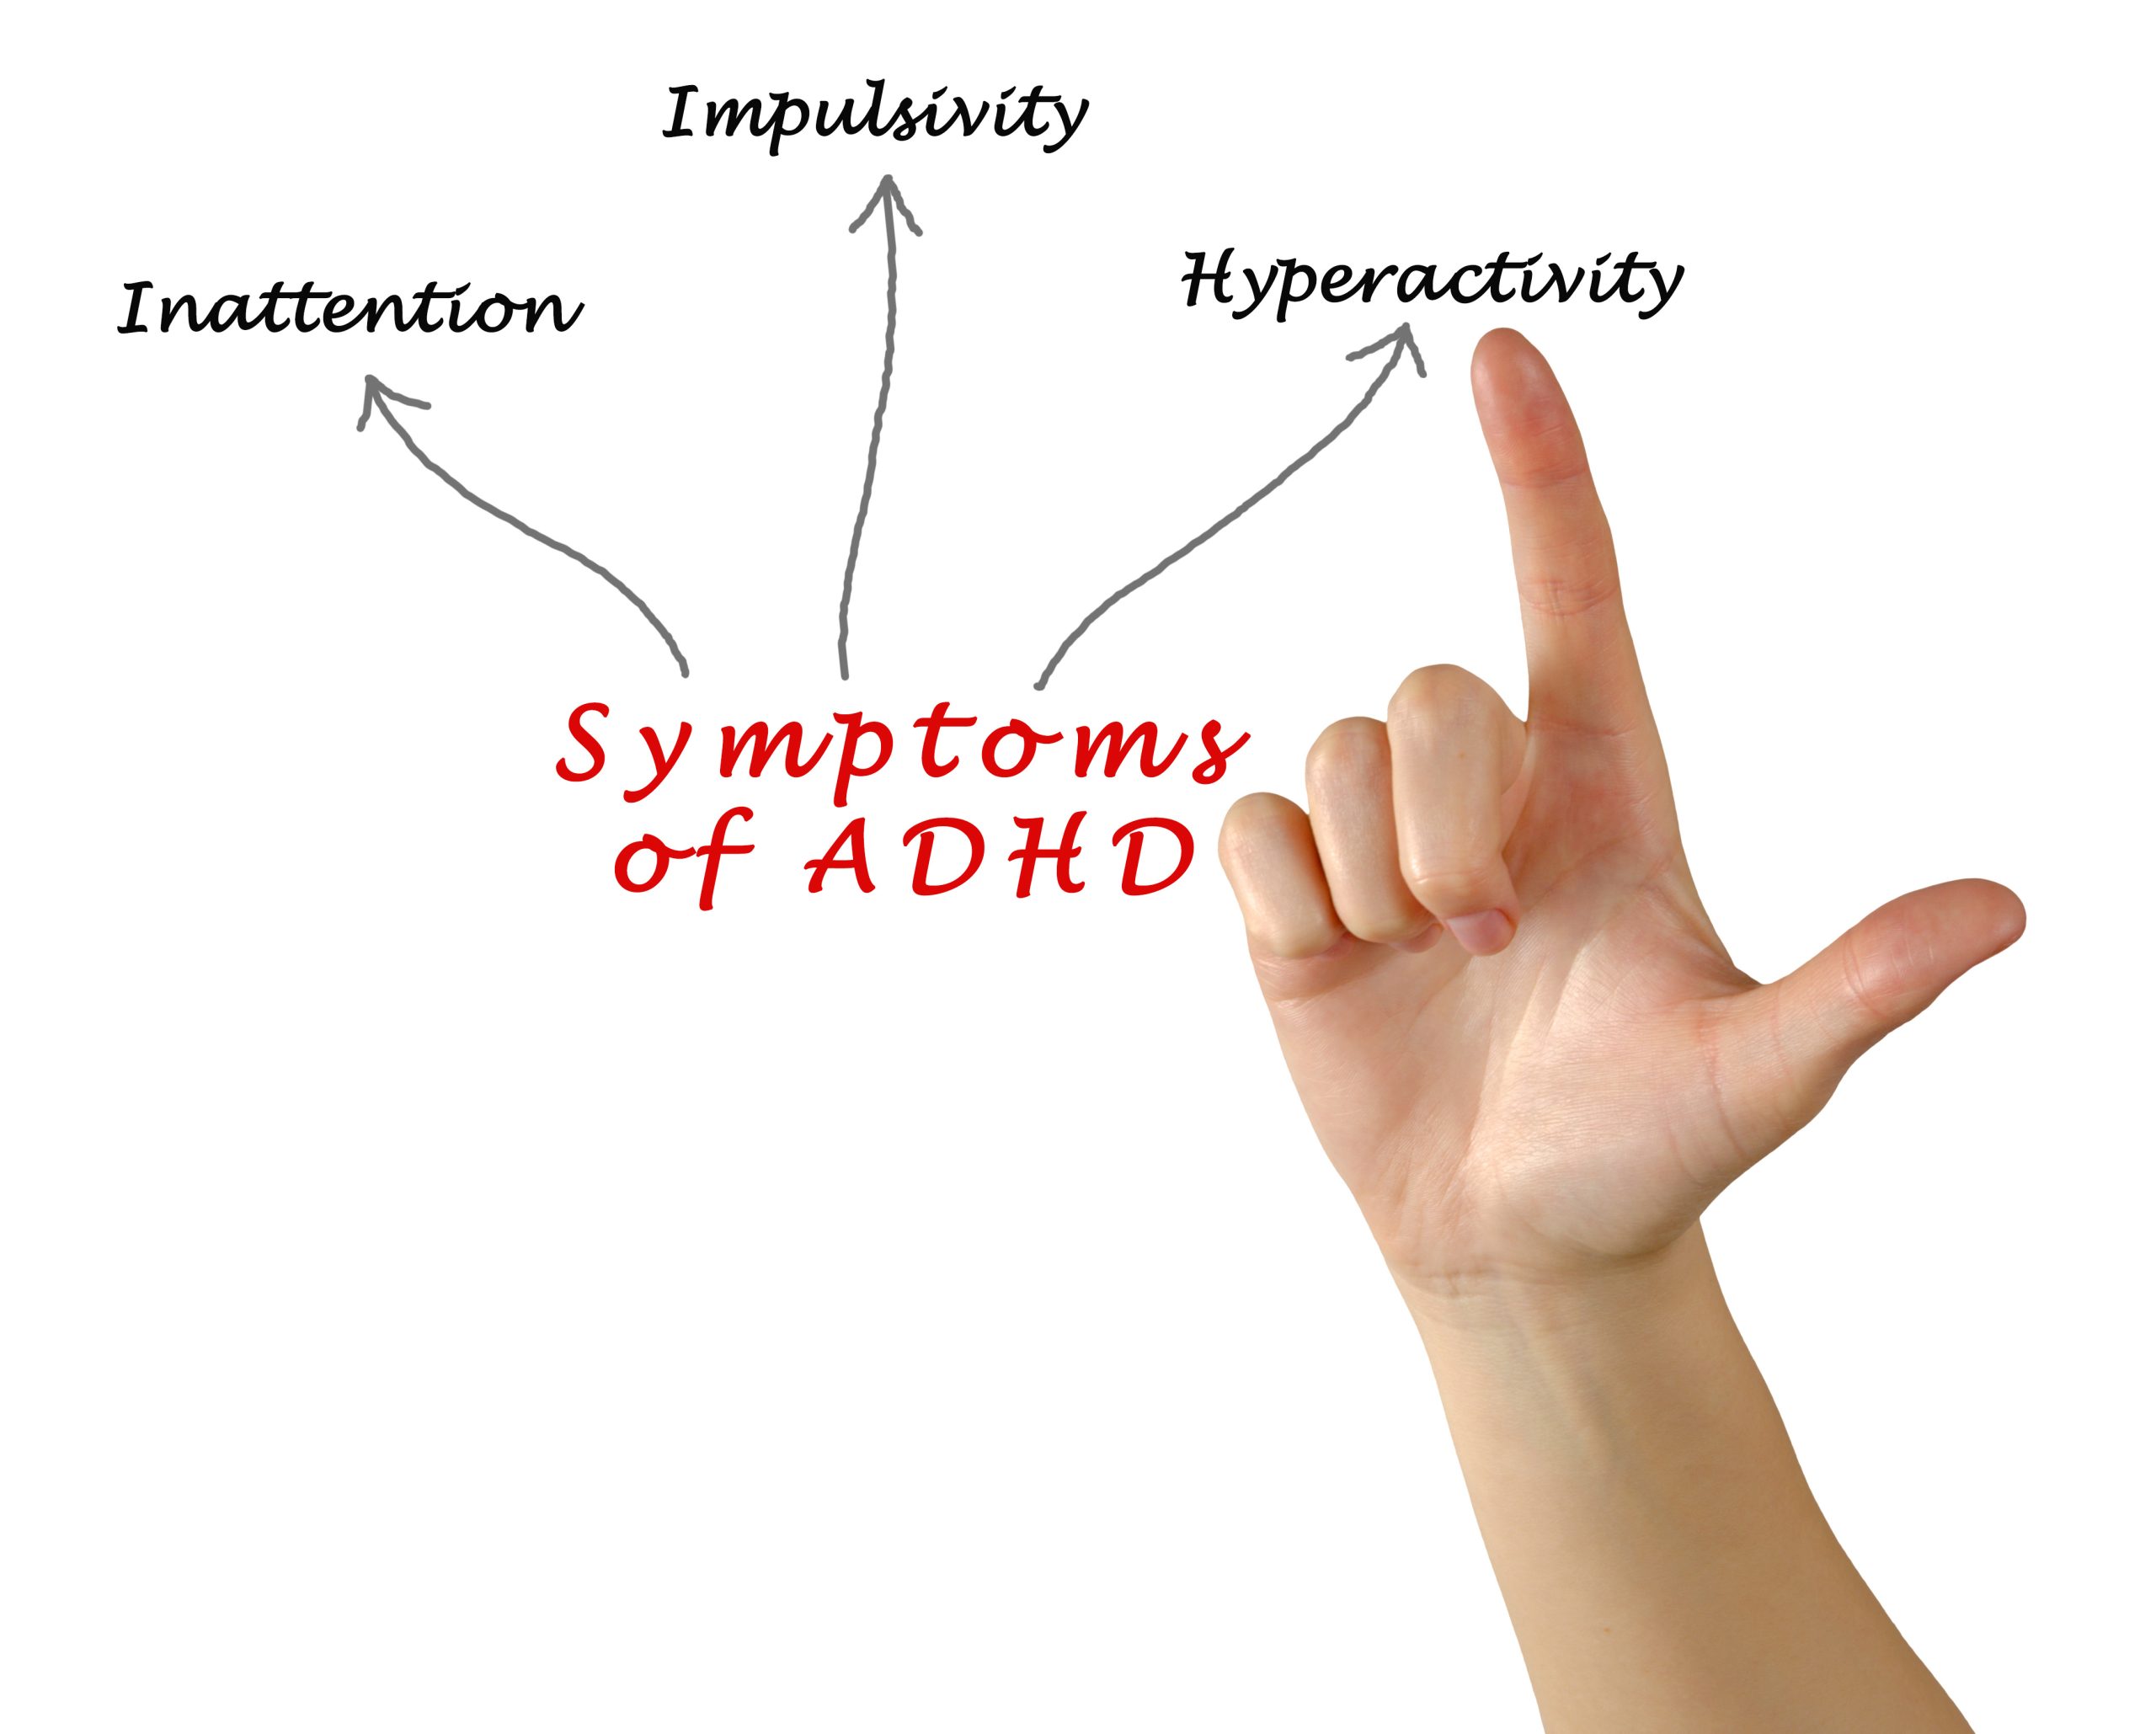 Symptoms of ADHD assess by a porfessional